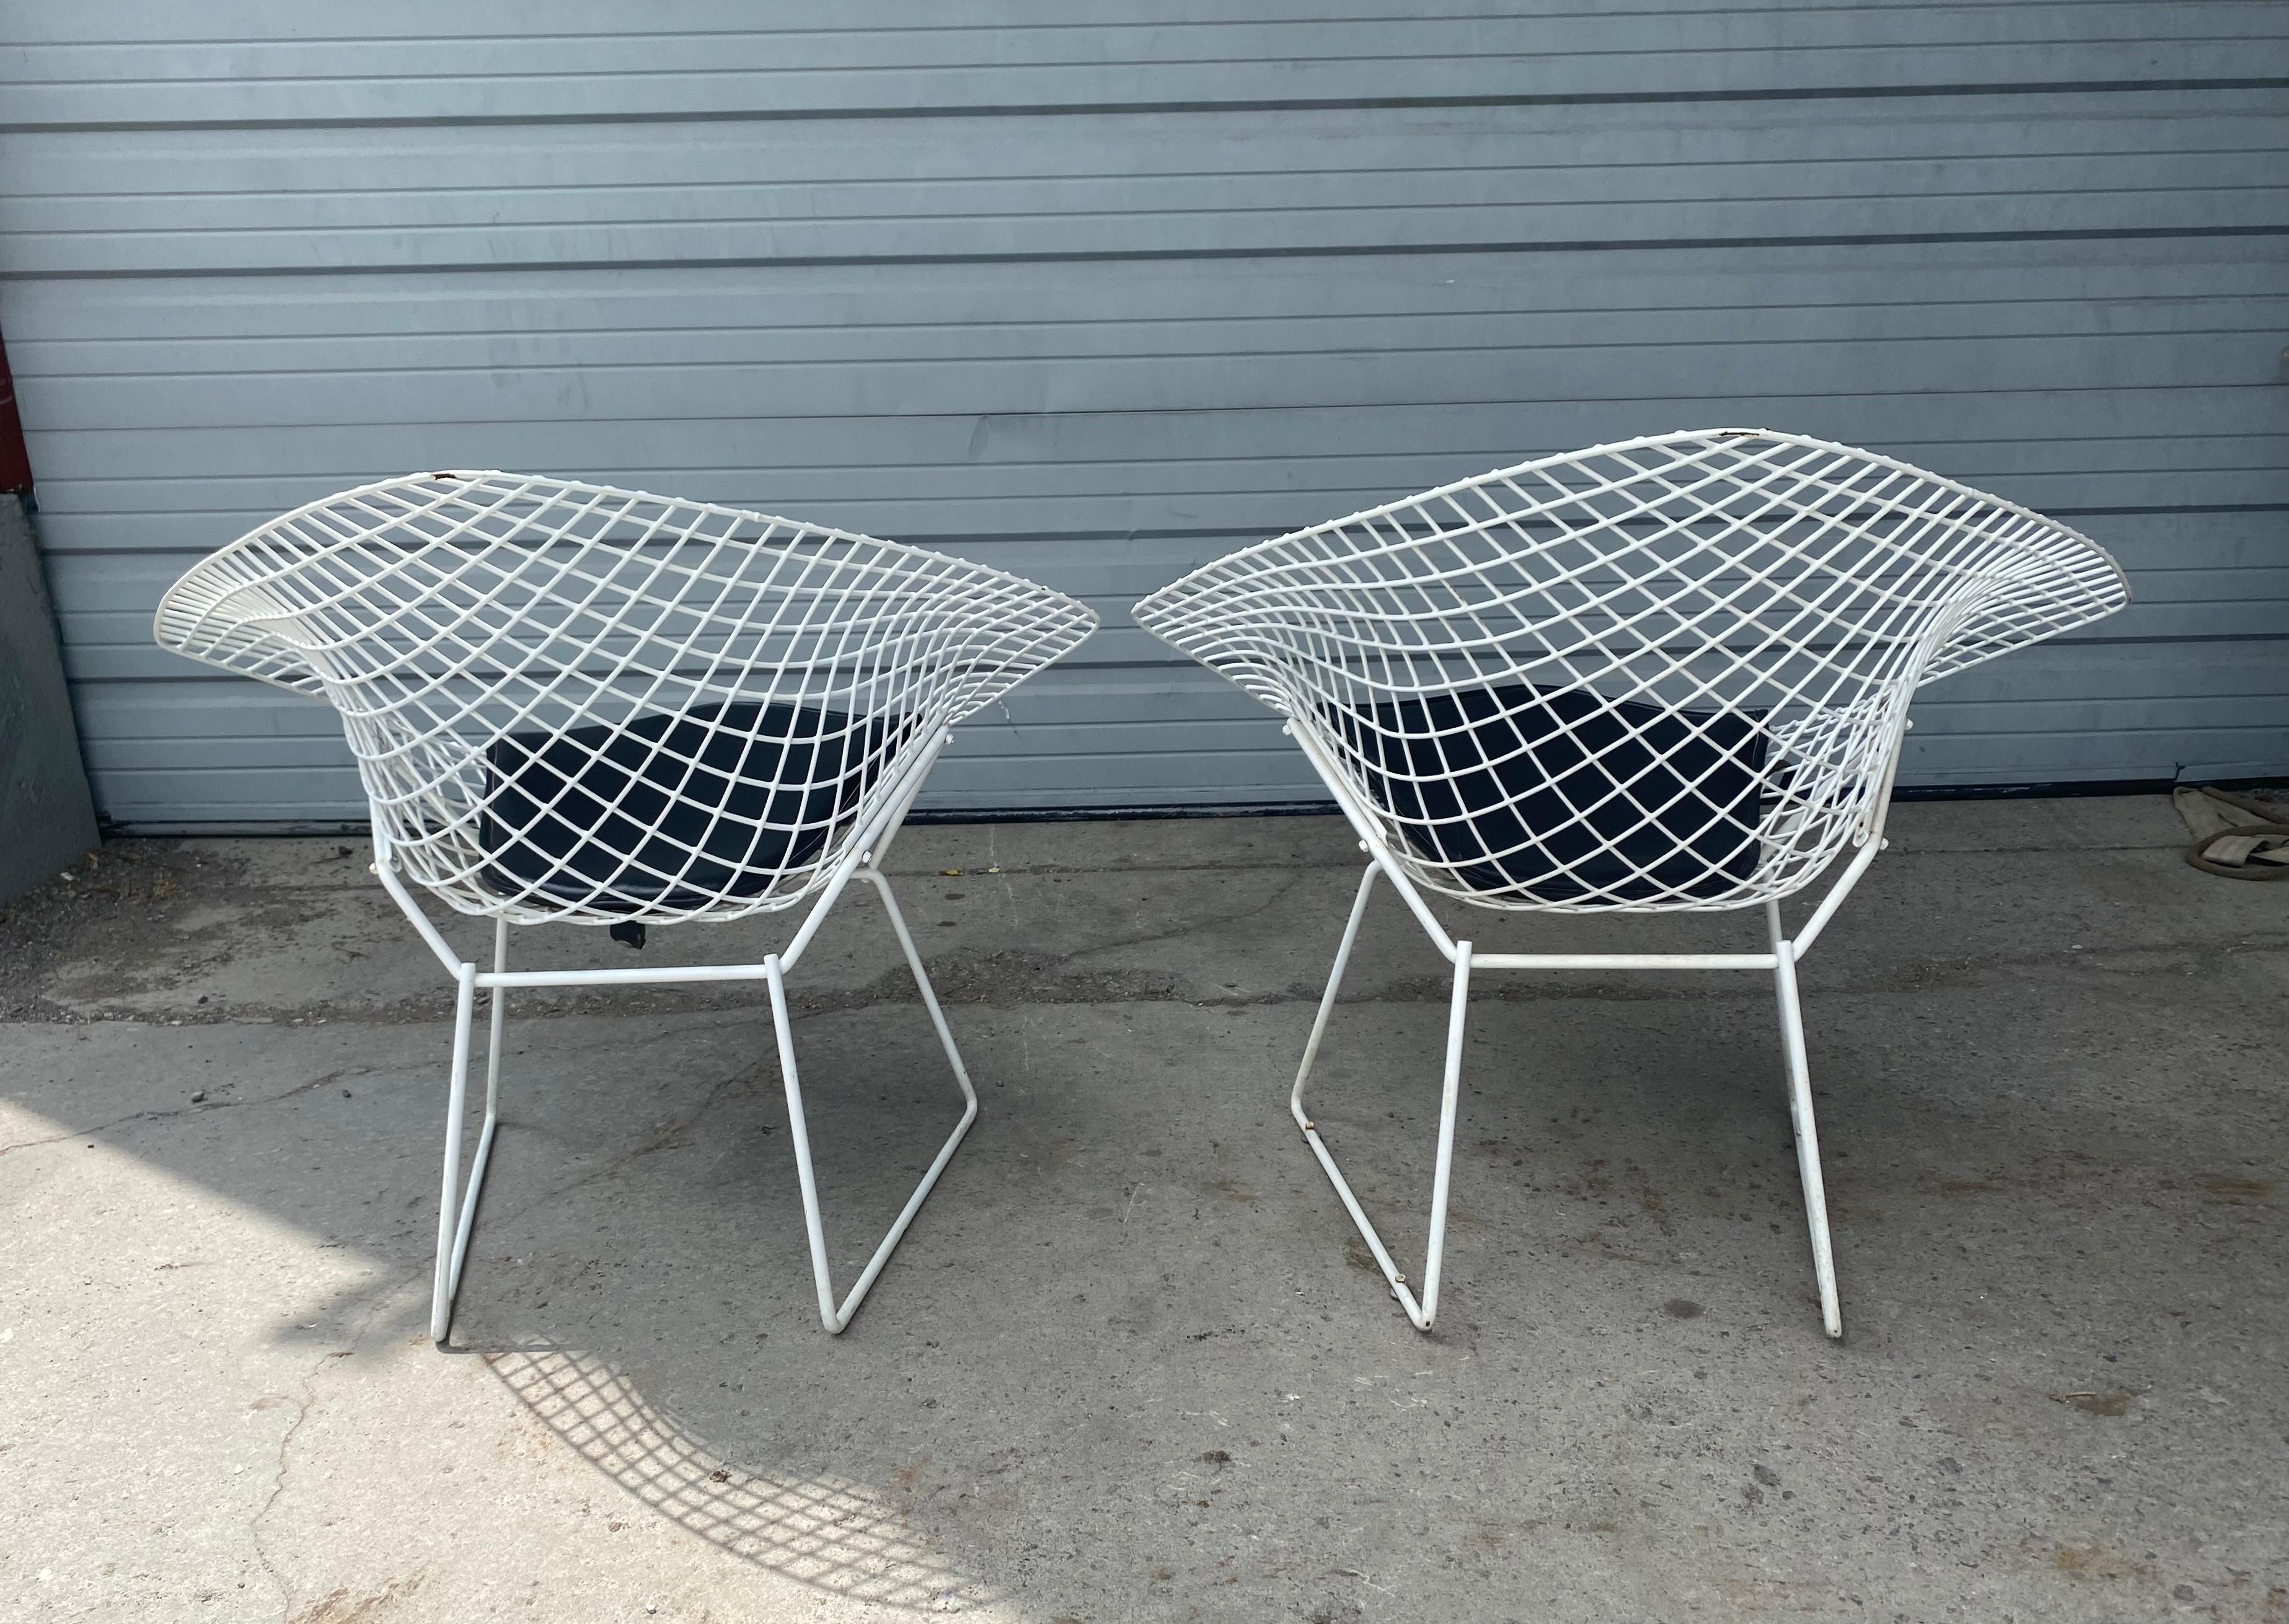 Classic set (6) side dining chairs designed by Harry Bertoia, manufactured by Knoll. These are coated for exterior use, but of course can be used inside as well, black seat pads are replacements. Chairs came from estate along with a large group of